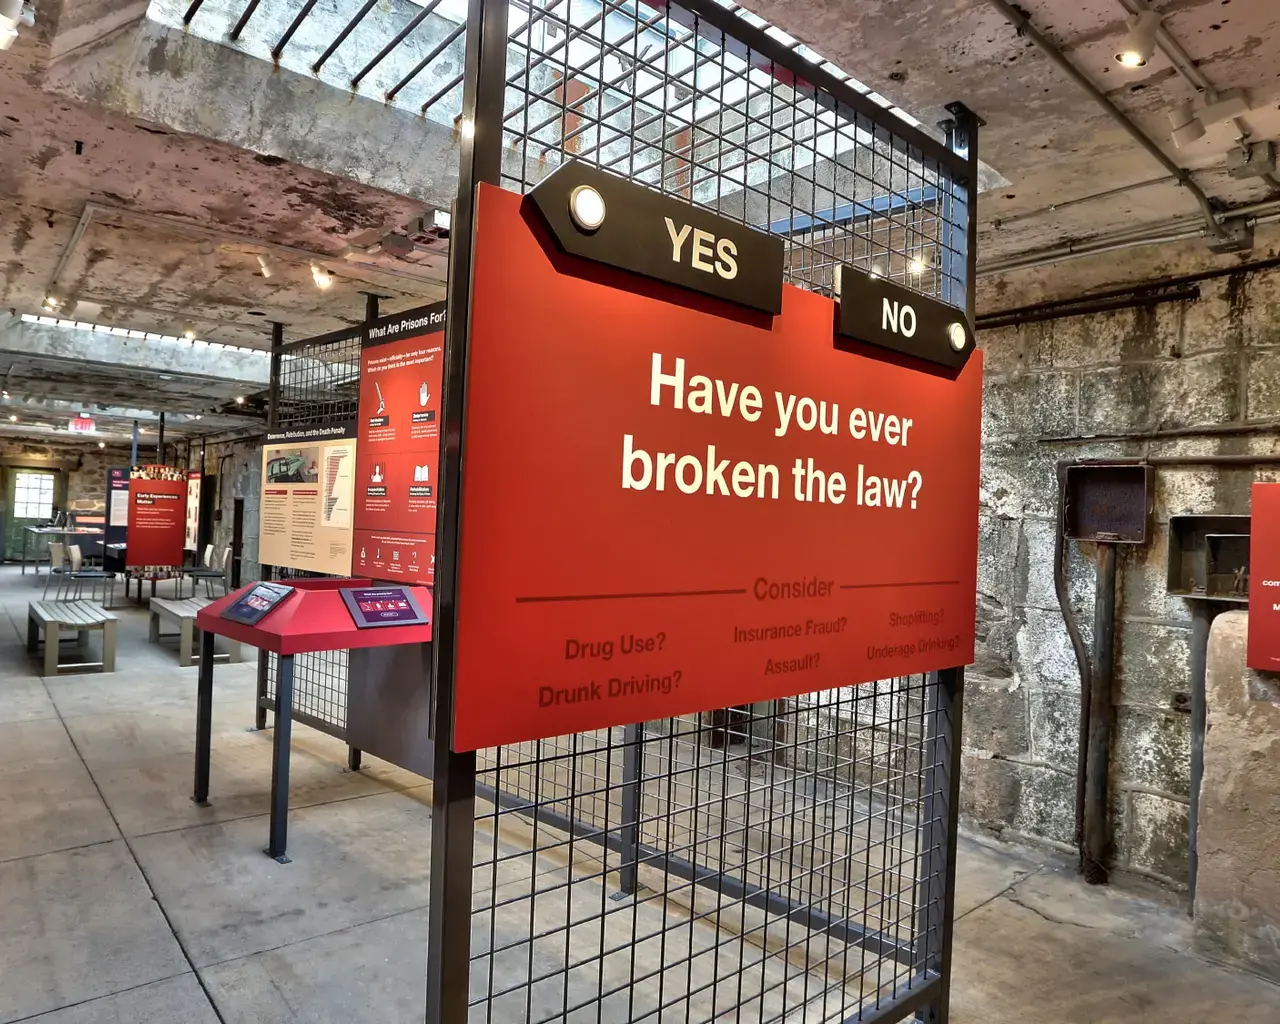 Installation view of Prisons Today: Questions in the Age of Mass Incarceration. Photo by Darryl W. Moran.